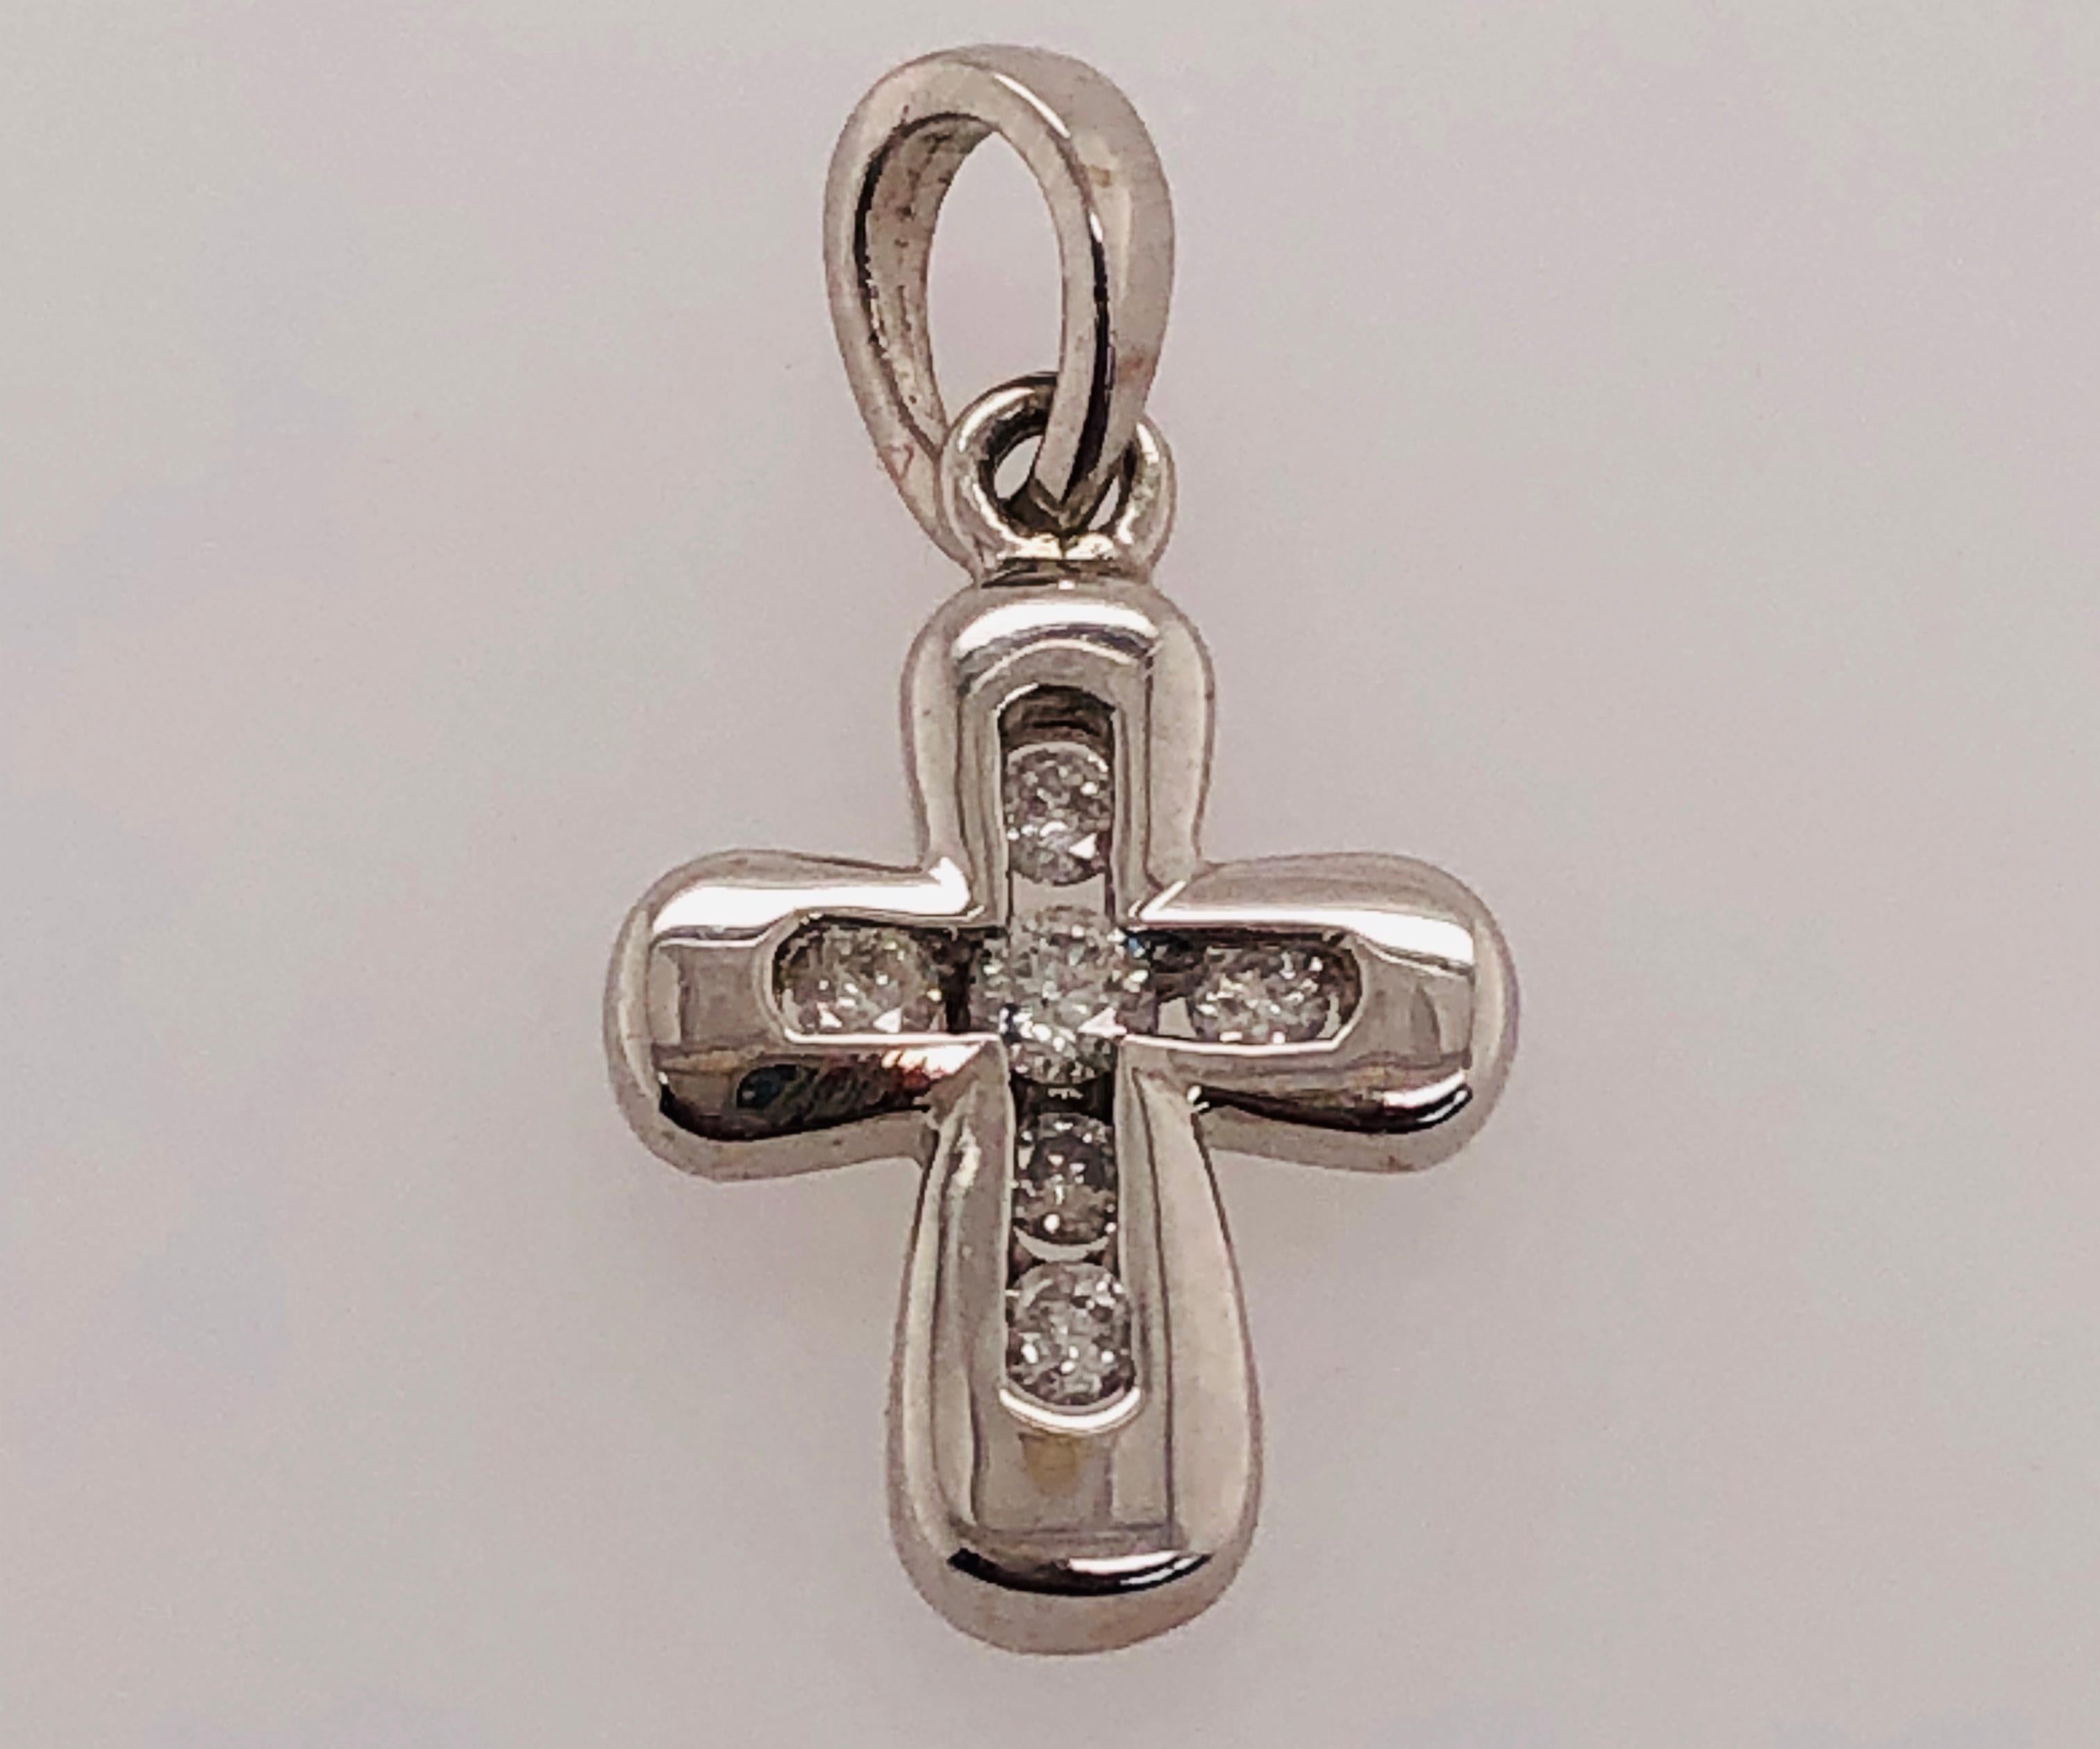 14Kt White Gold Cross/Religious Pendant 0.10 Total Diamond Weight
0.99 grams Total weight